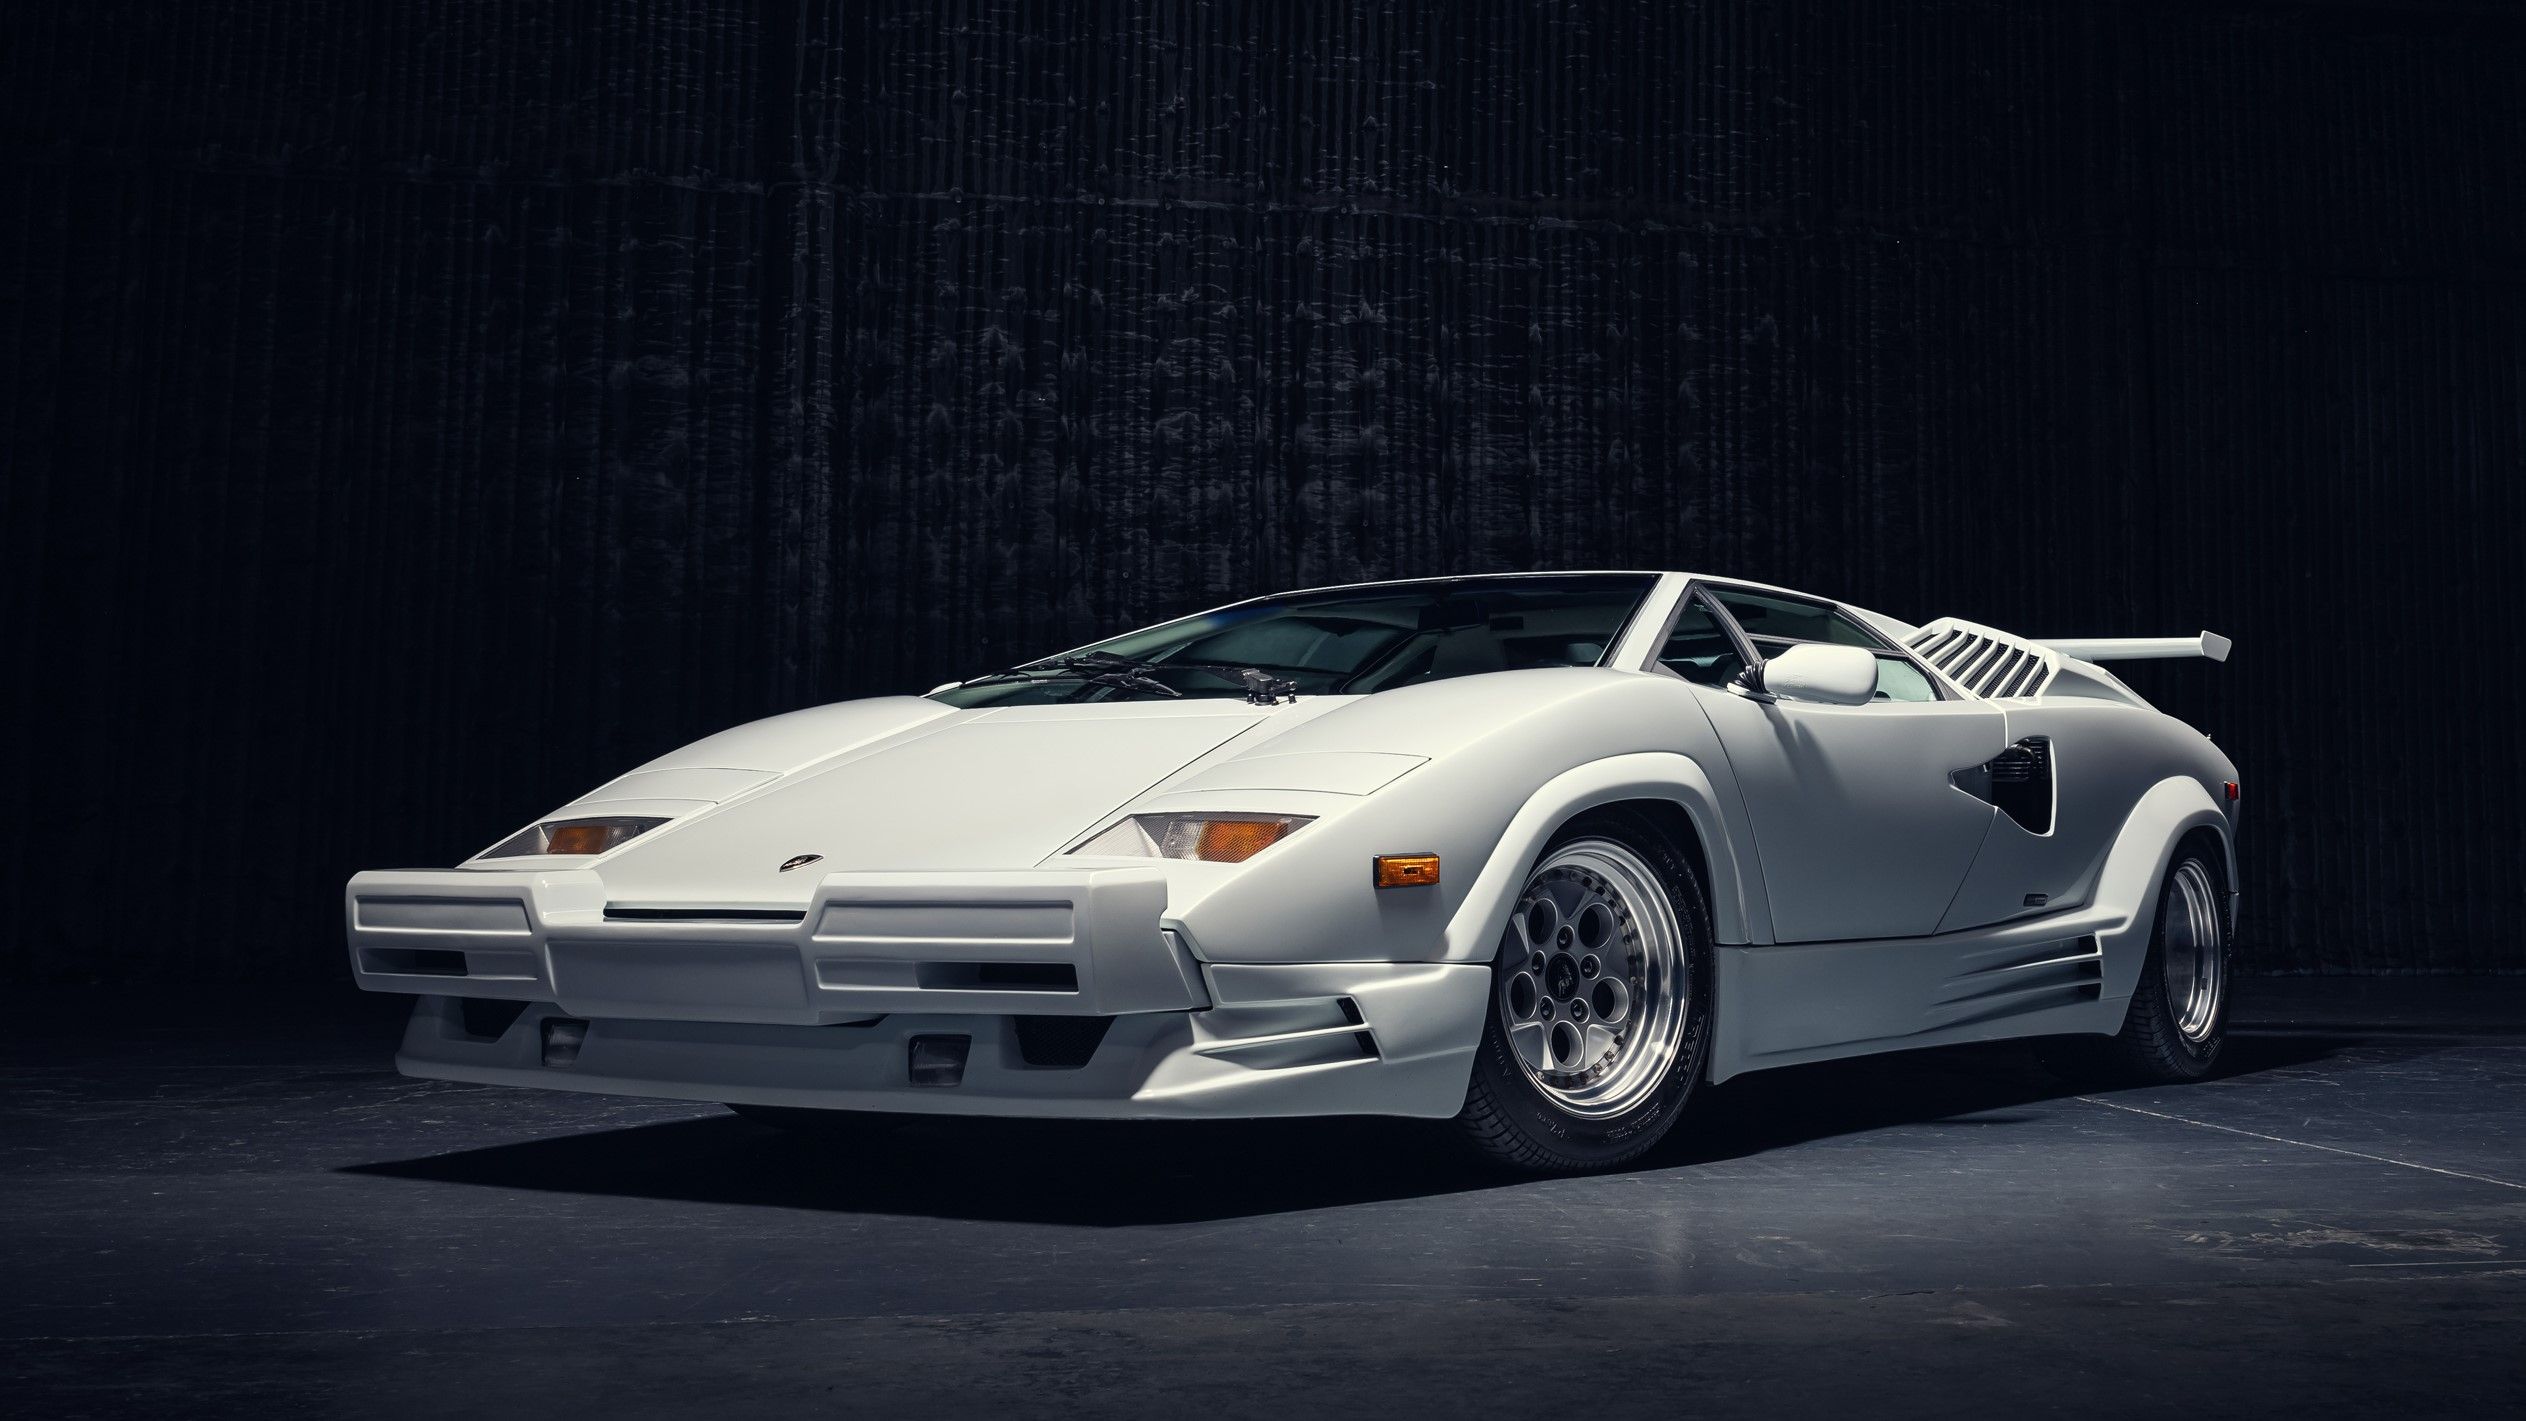 General 2526x1421 Lamborghini Countach Countach 25th Anniversary white cars photography car frontal view vehicle simple background italian cars Volkswagen Group